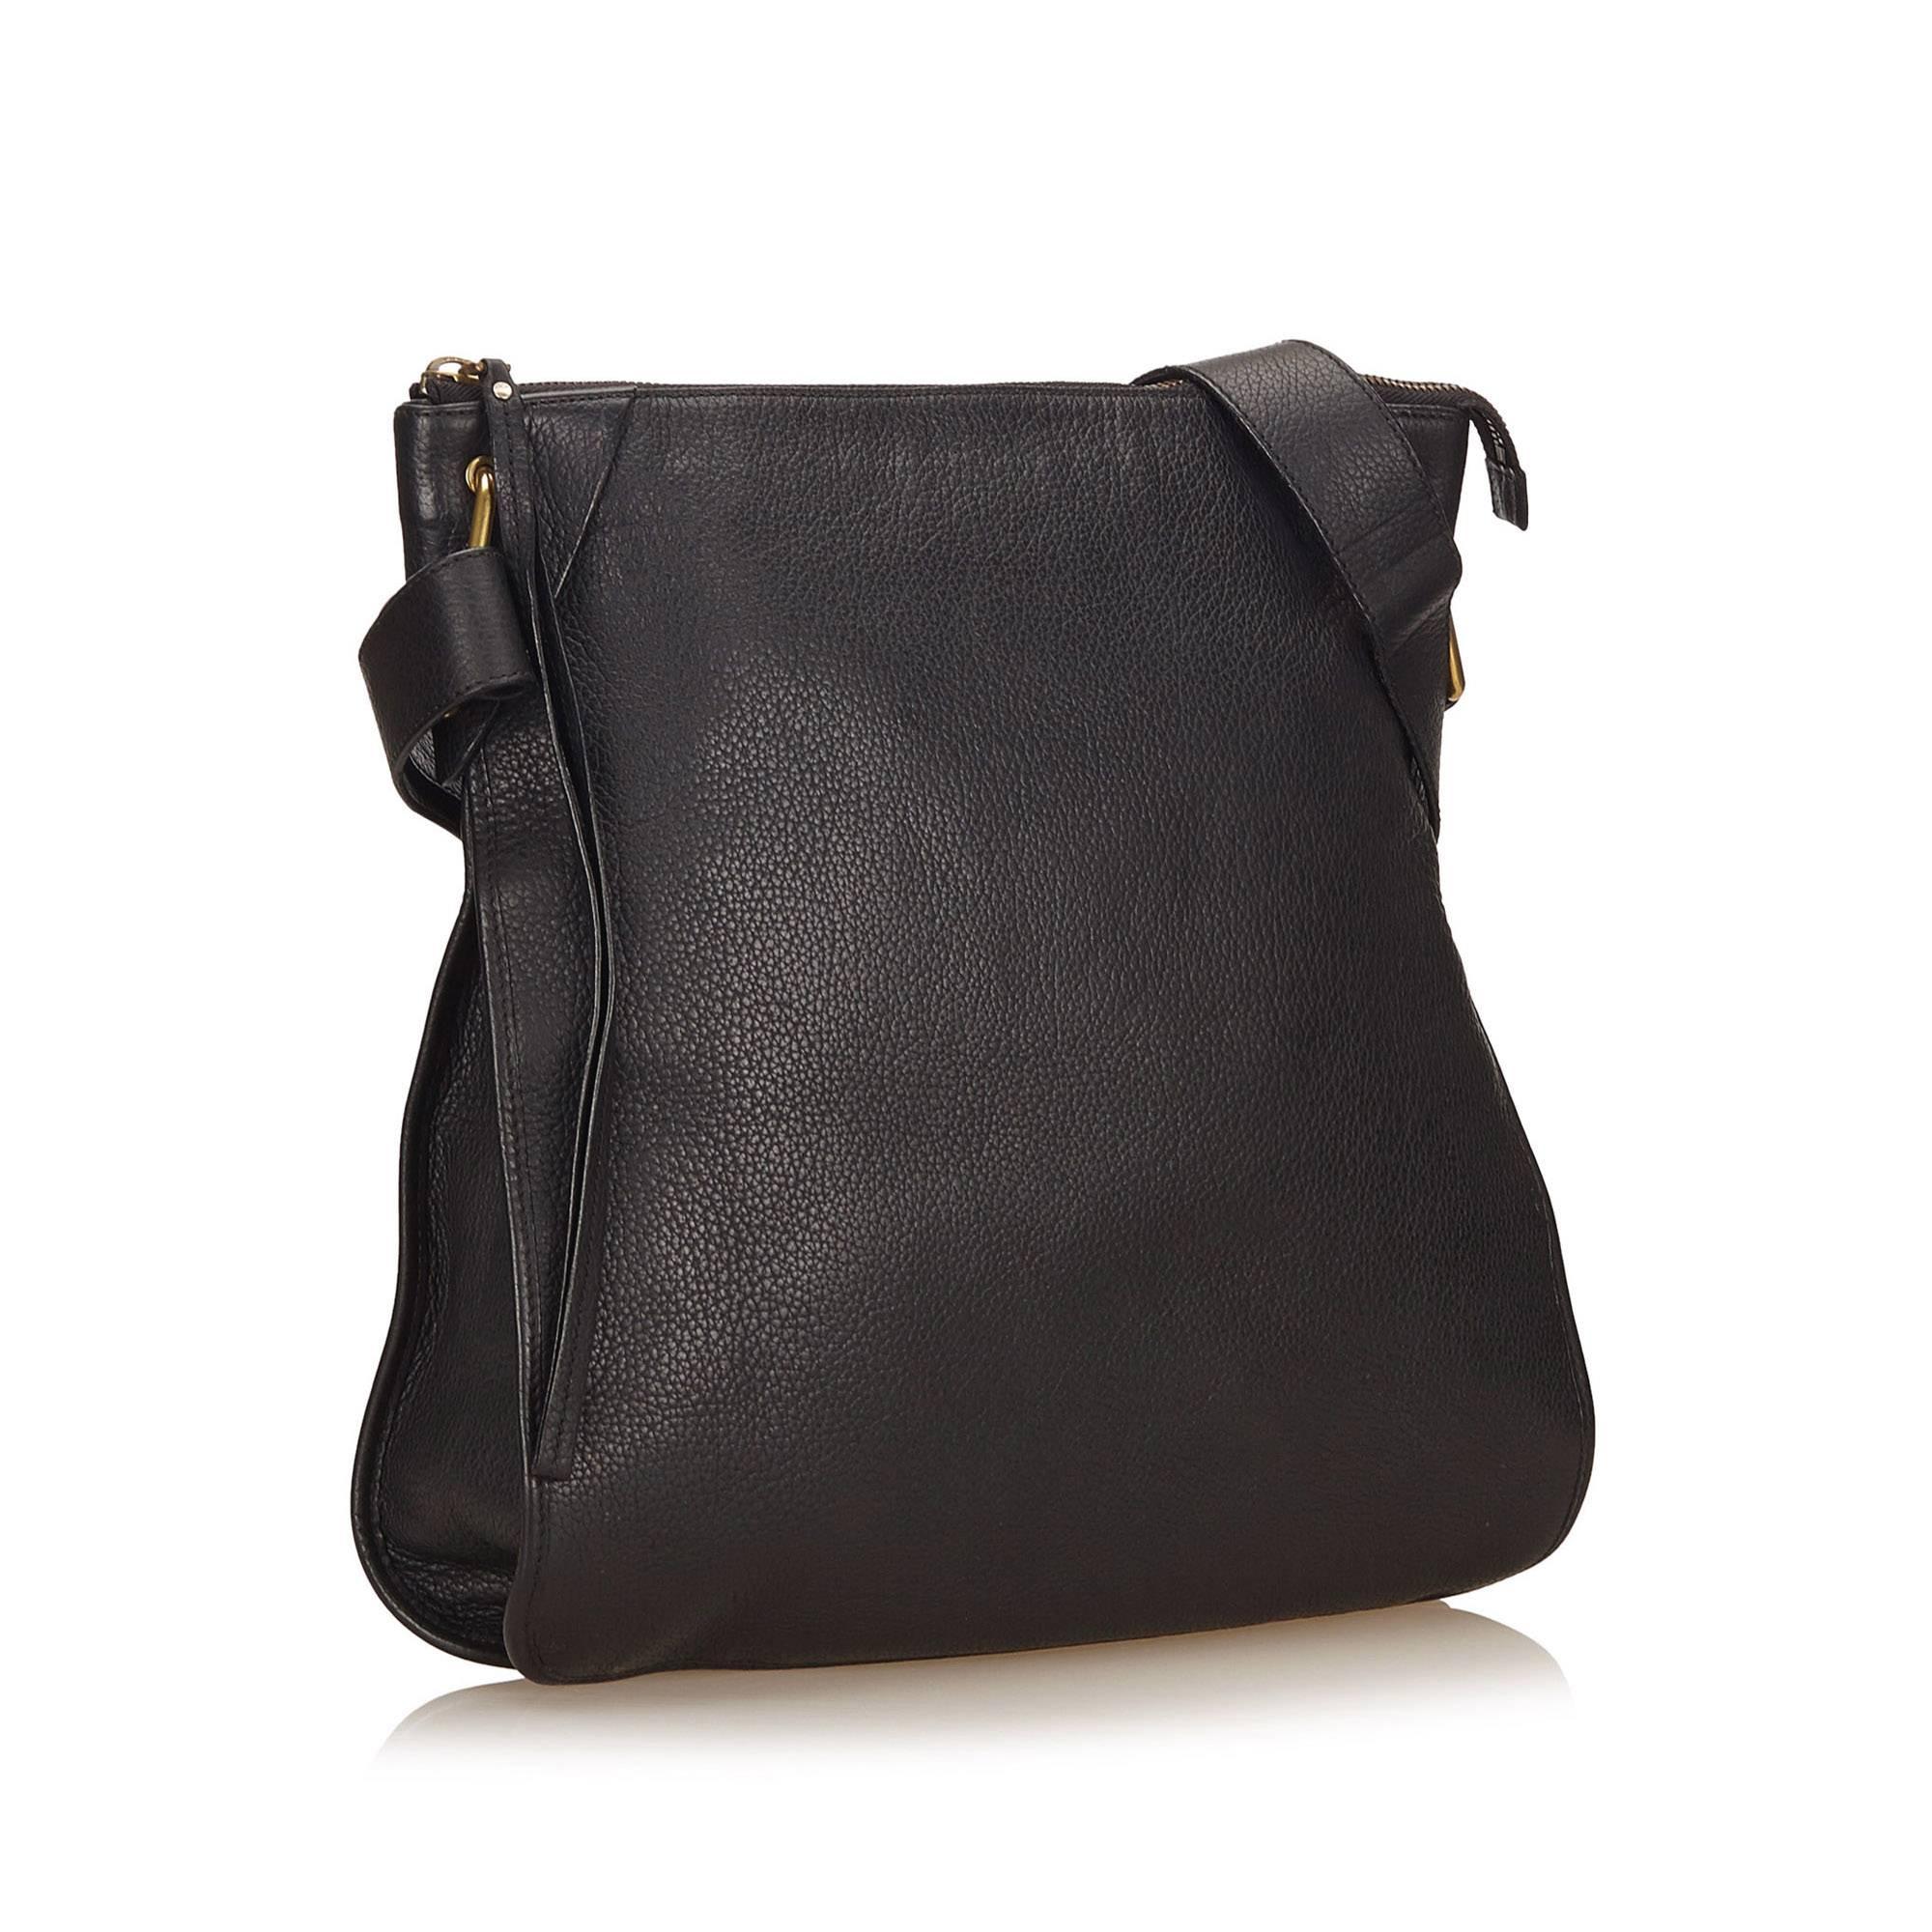 This shoulder bag features a leather body, flat strap, top zip closure, and interior zip pocket. 

It carries a B condition rating.

Dimensions: 
Length 36 cm
Width 40 cm
Depth 5 cm
Shoulder Drop 61 cm

Inclusions: No longer comes with original